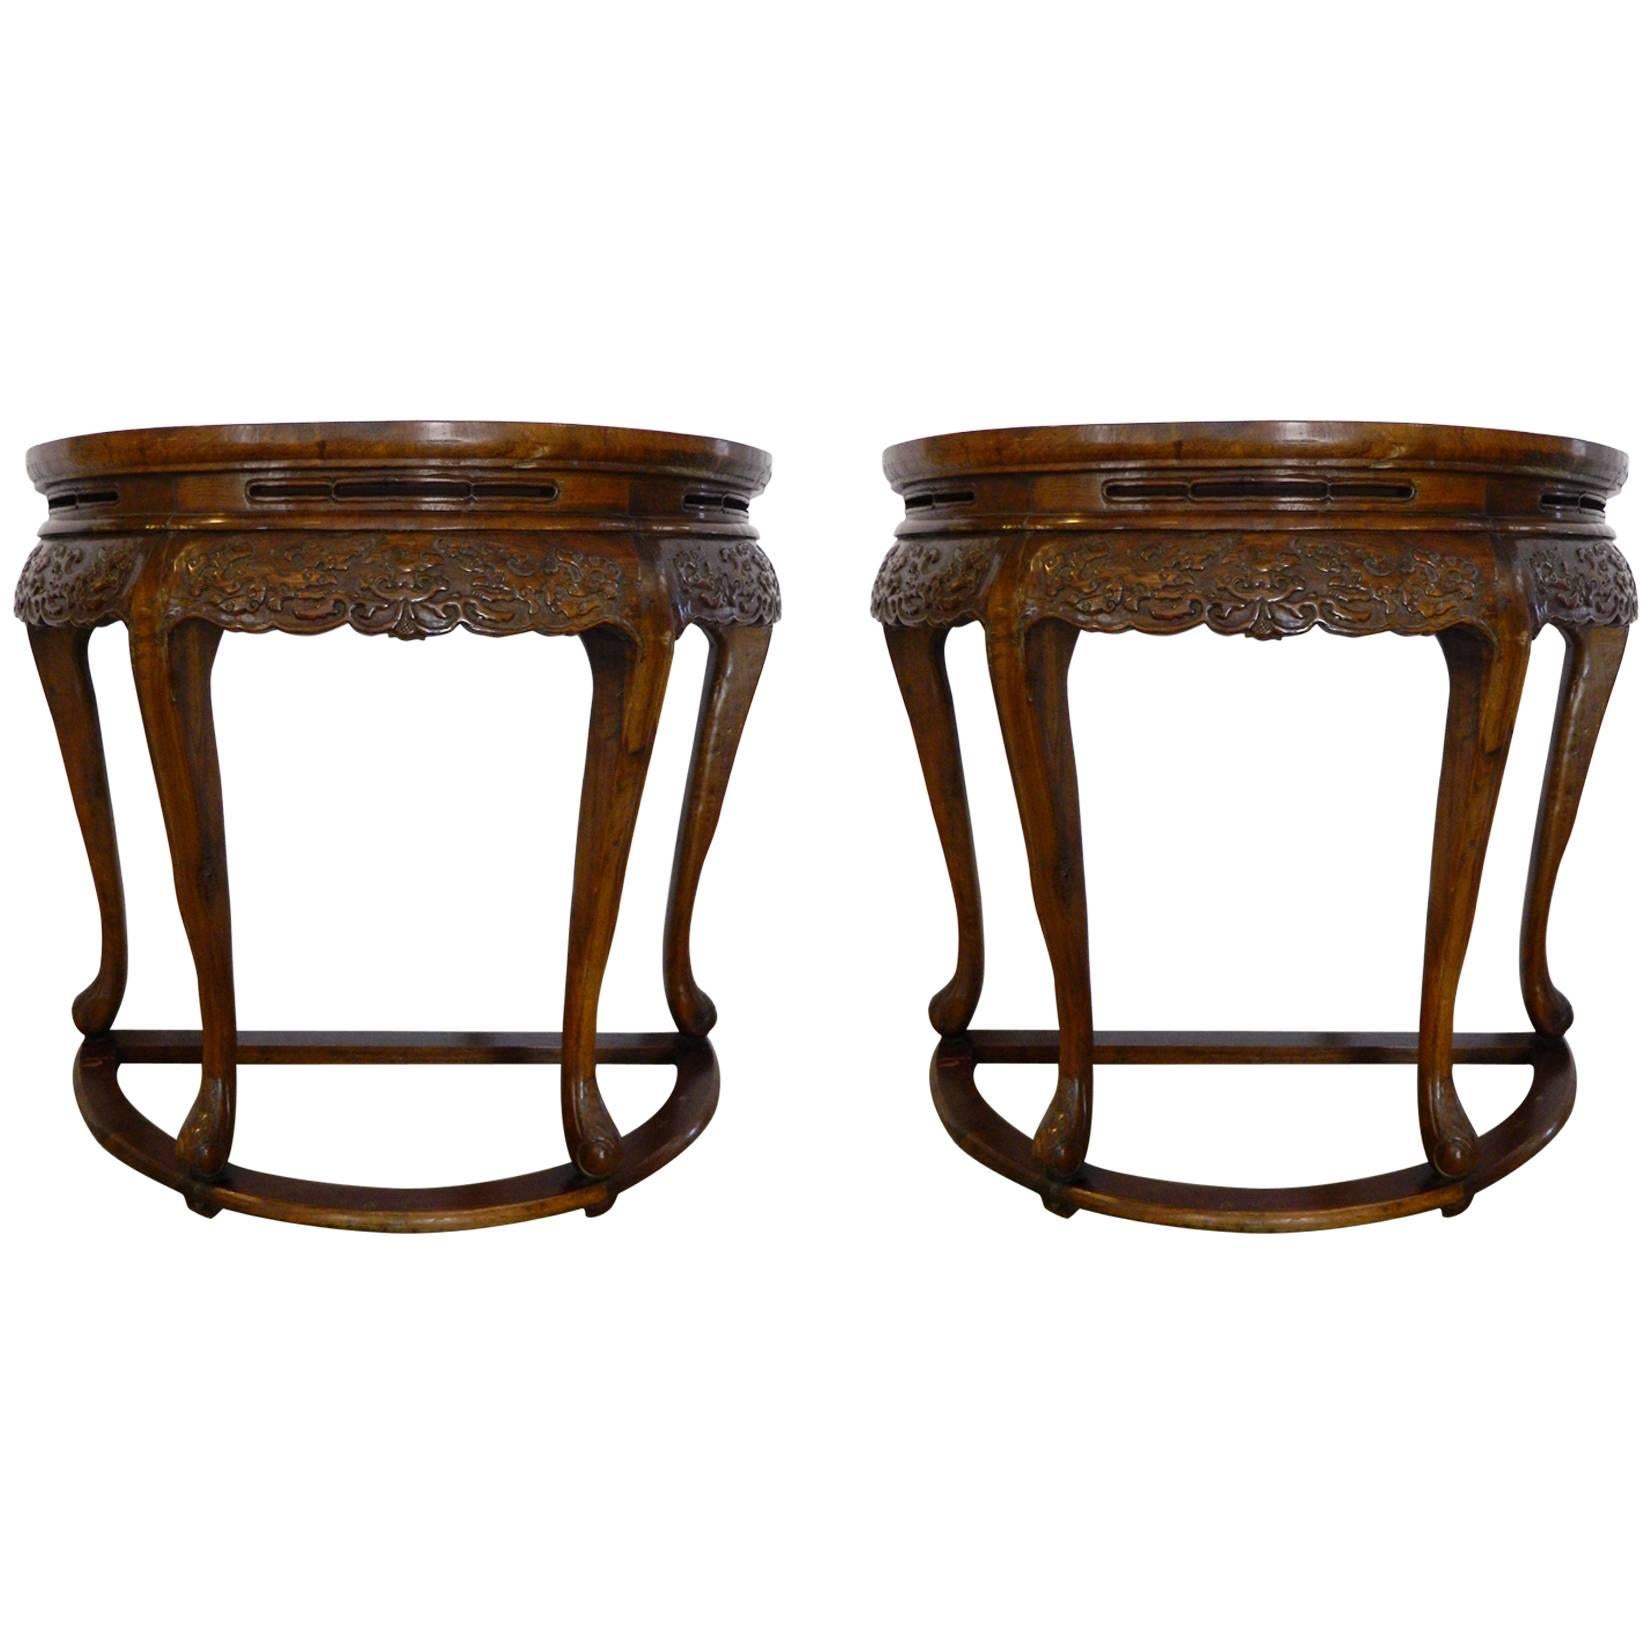 Pair of Chinese Demilune Tables 19th Century 35" Round For Sale